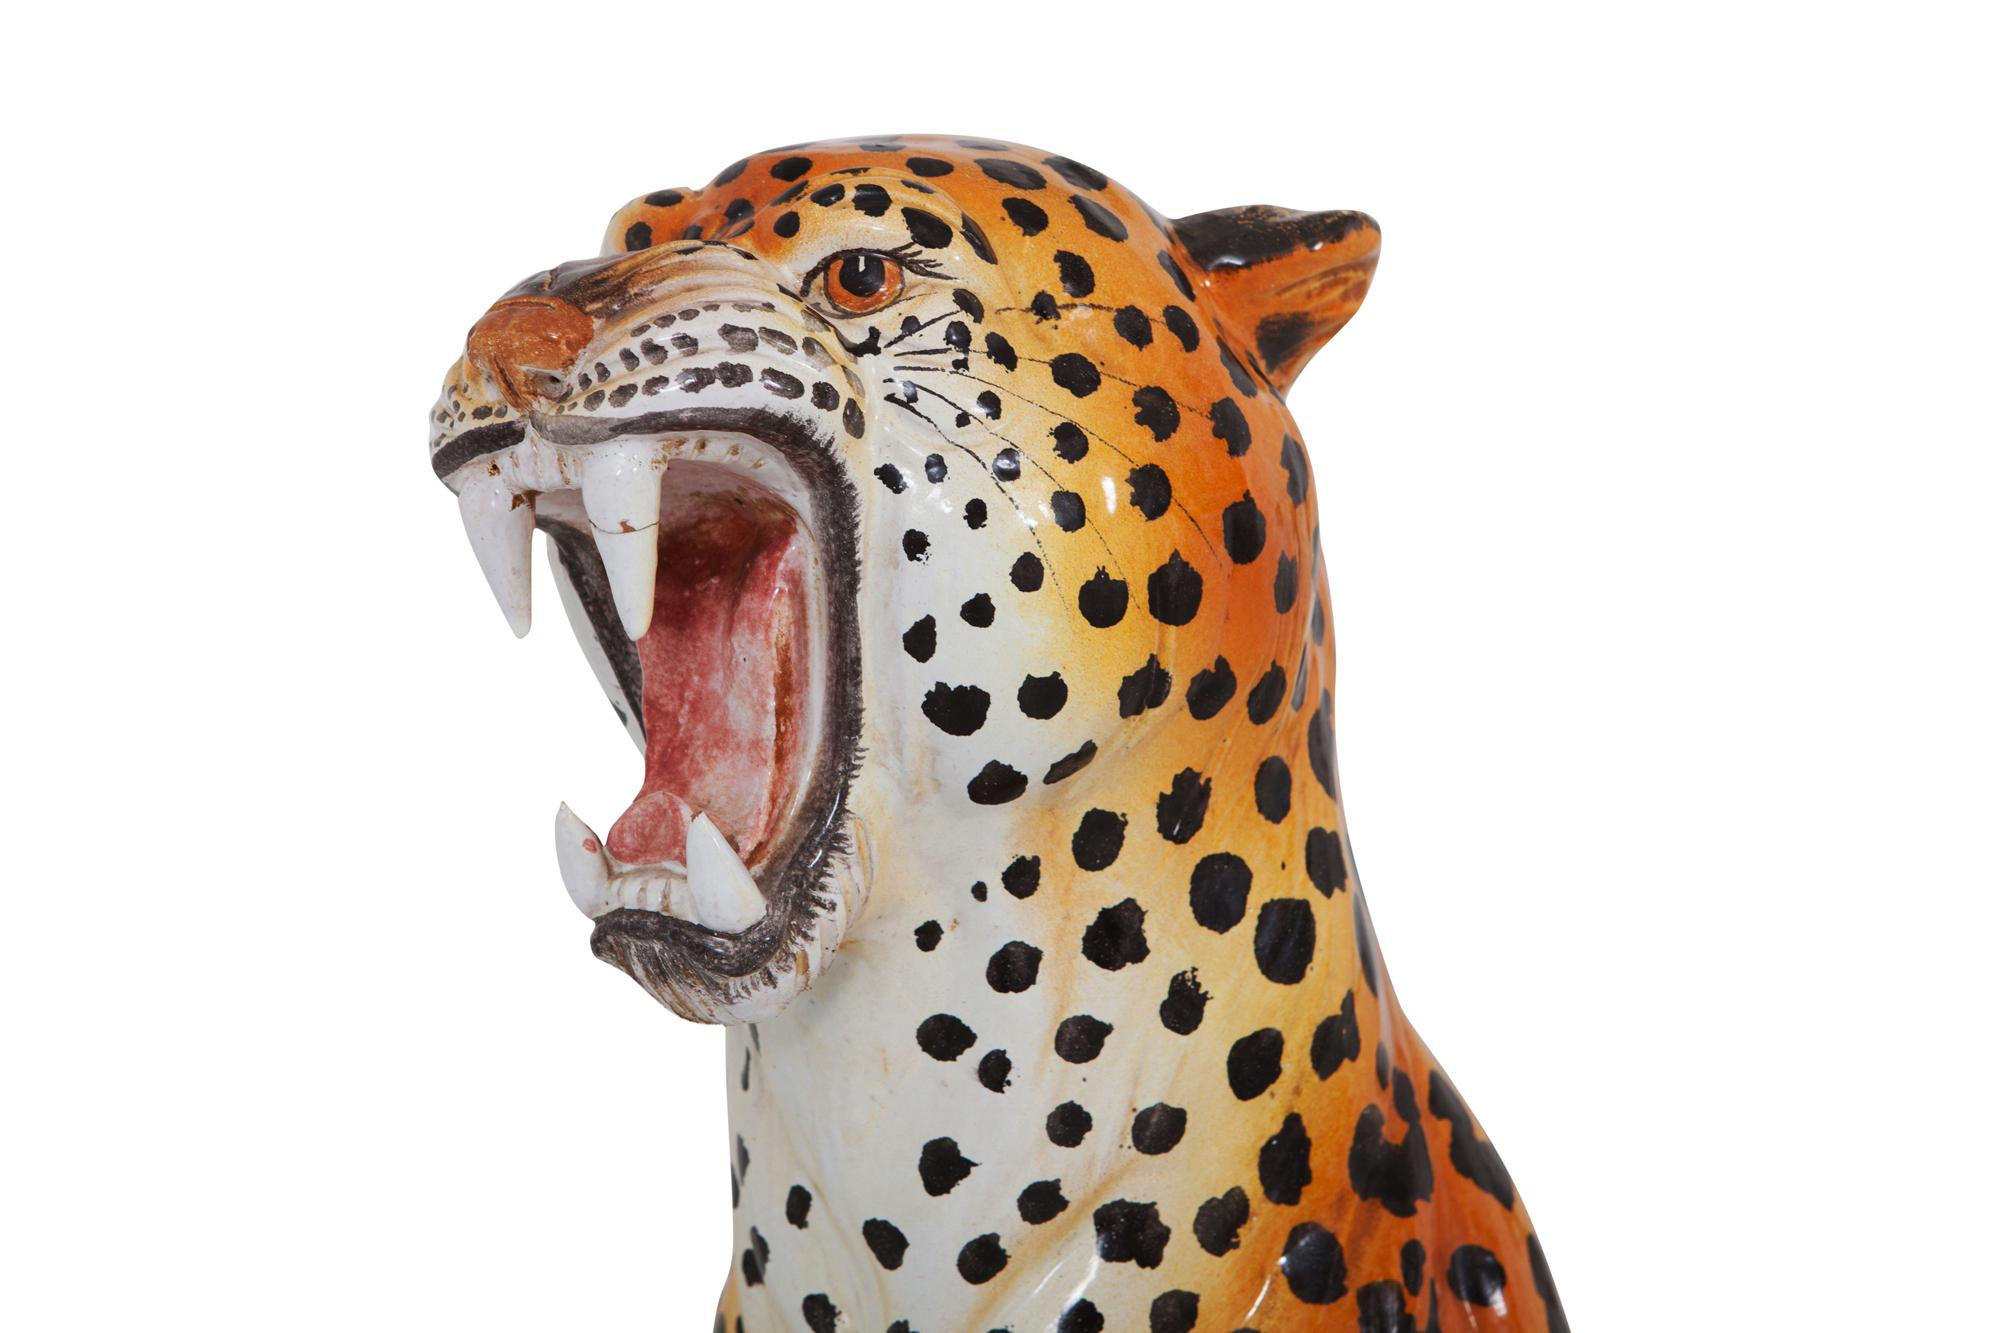 Italian Leopard Ceramic Hand-Painted Sculptures from Italy, 1950s